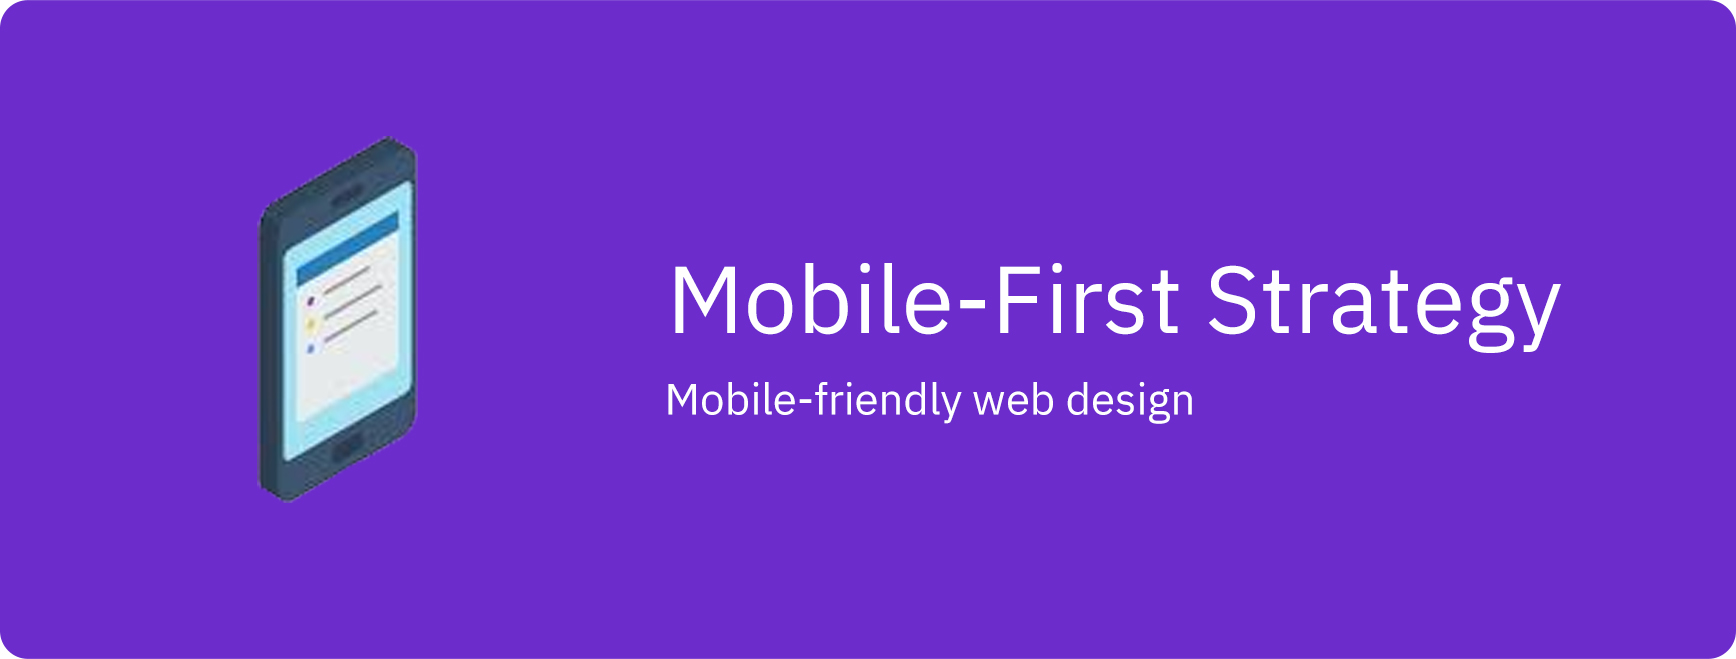 Mobile first strategy